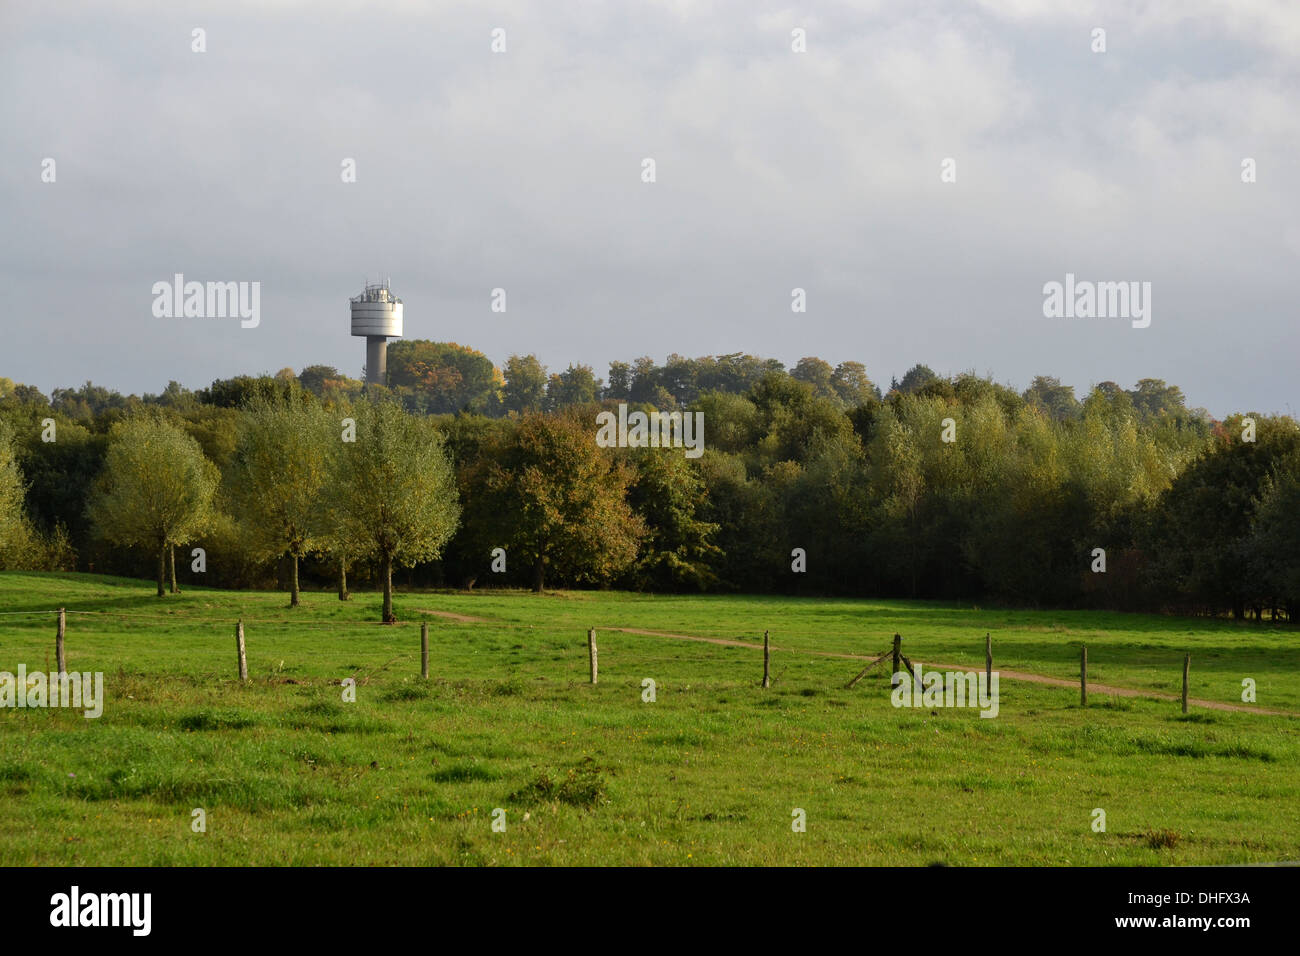 Field in Limburg with overcast skies. Tower in background with attennae and mobile phone masts. Stock Photo